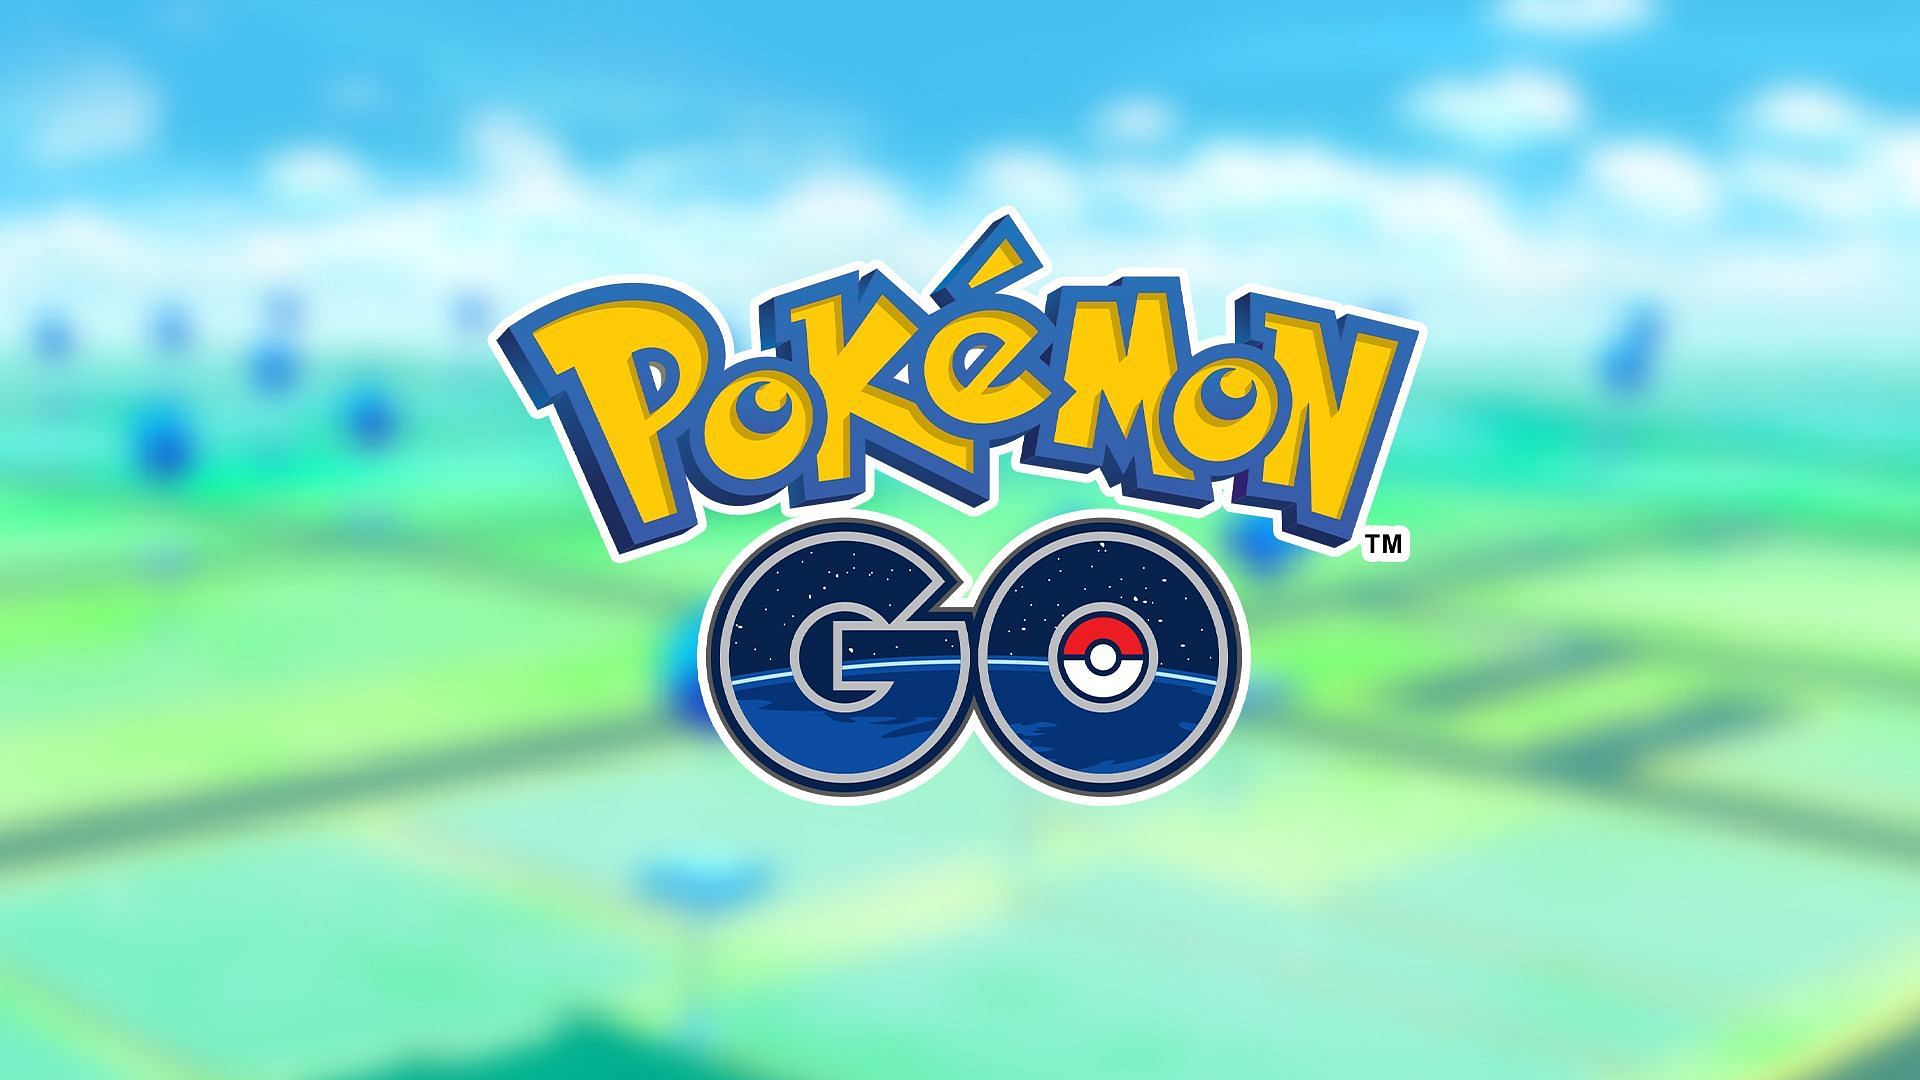 The logo for Pokemon GO as it is seen in various media.